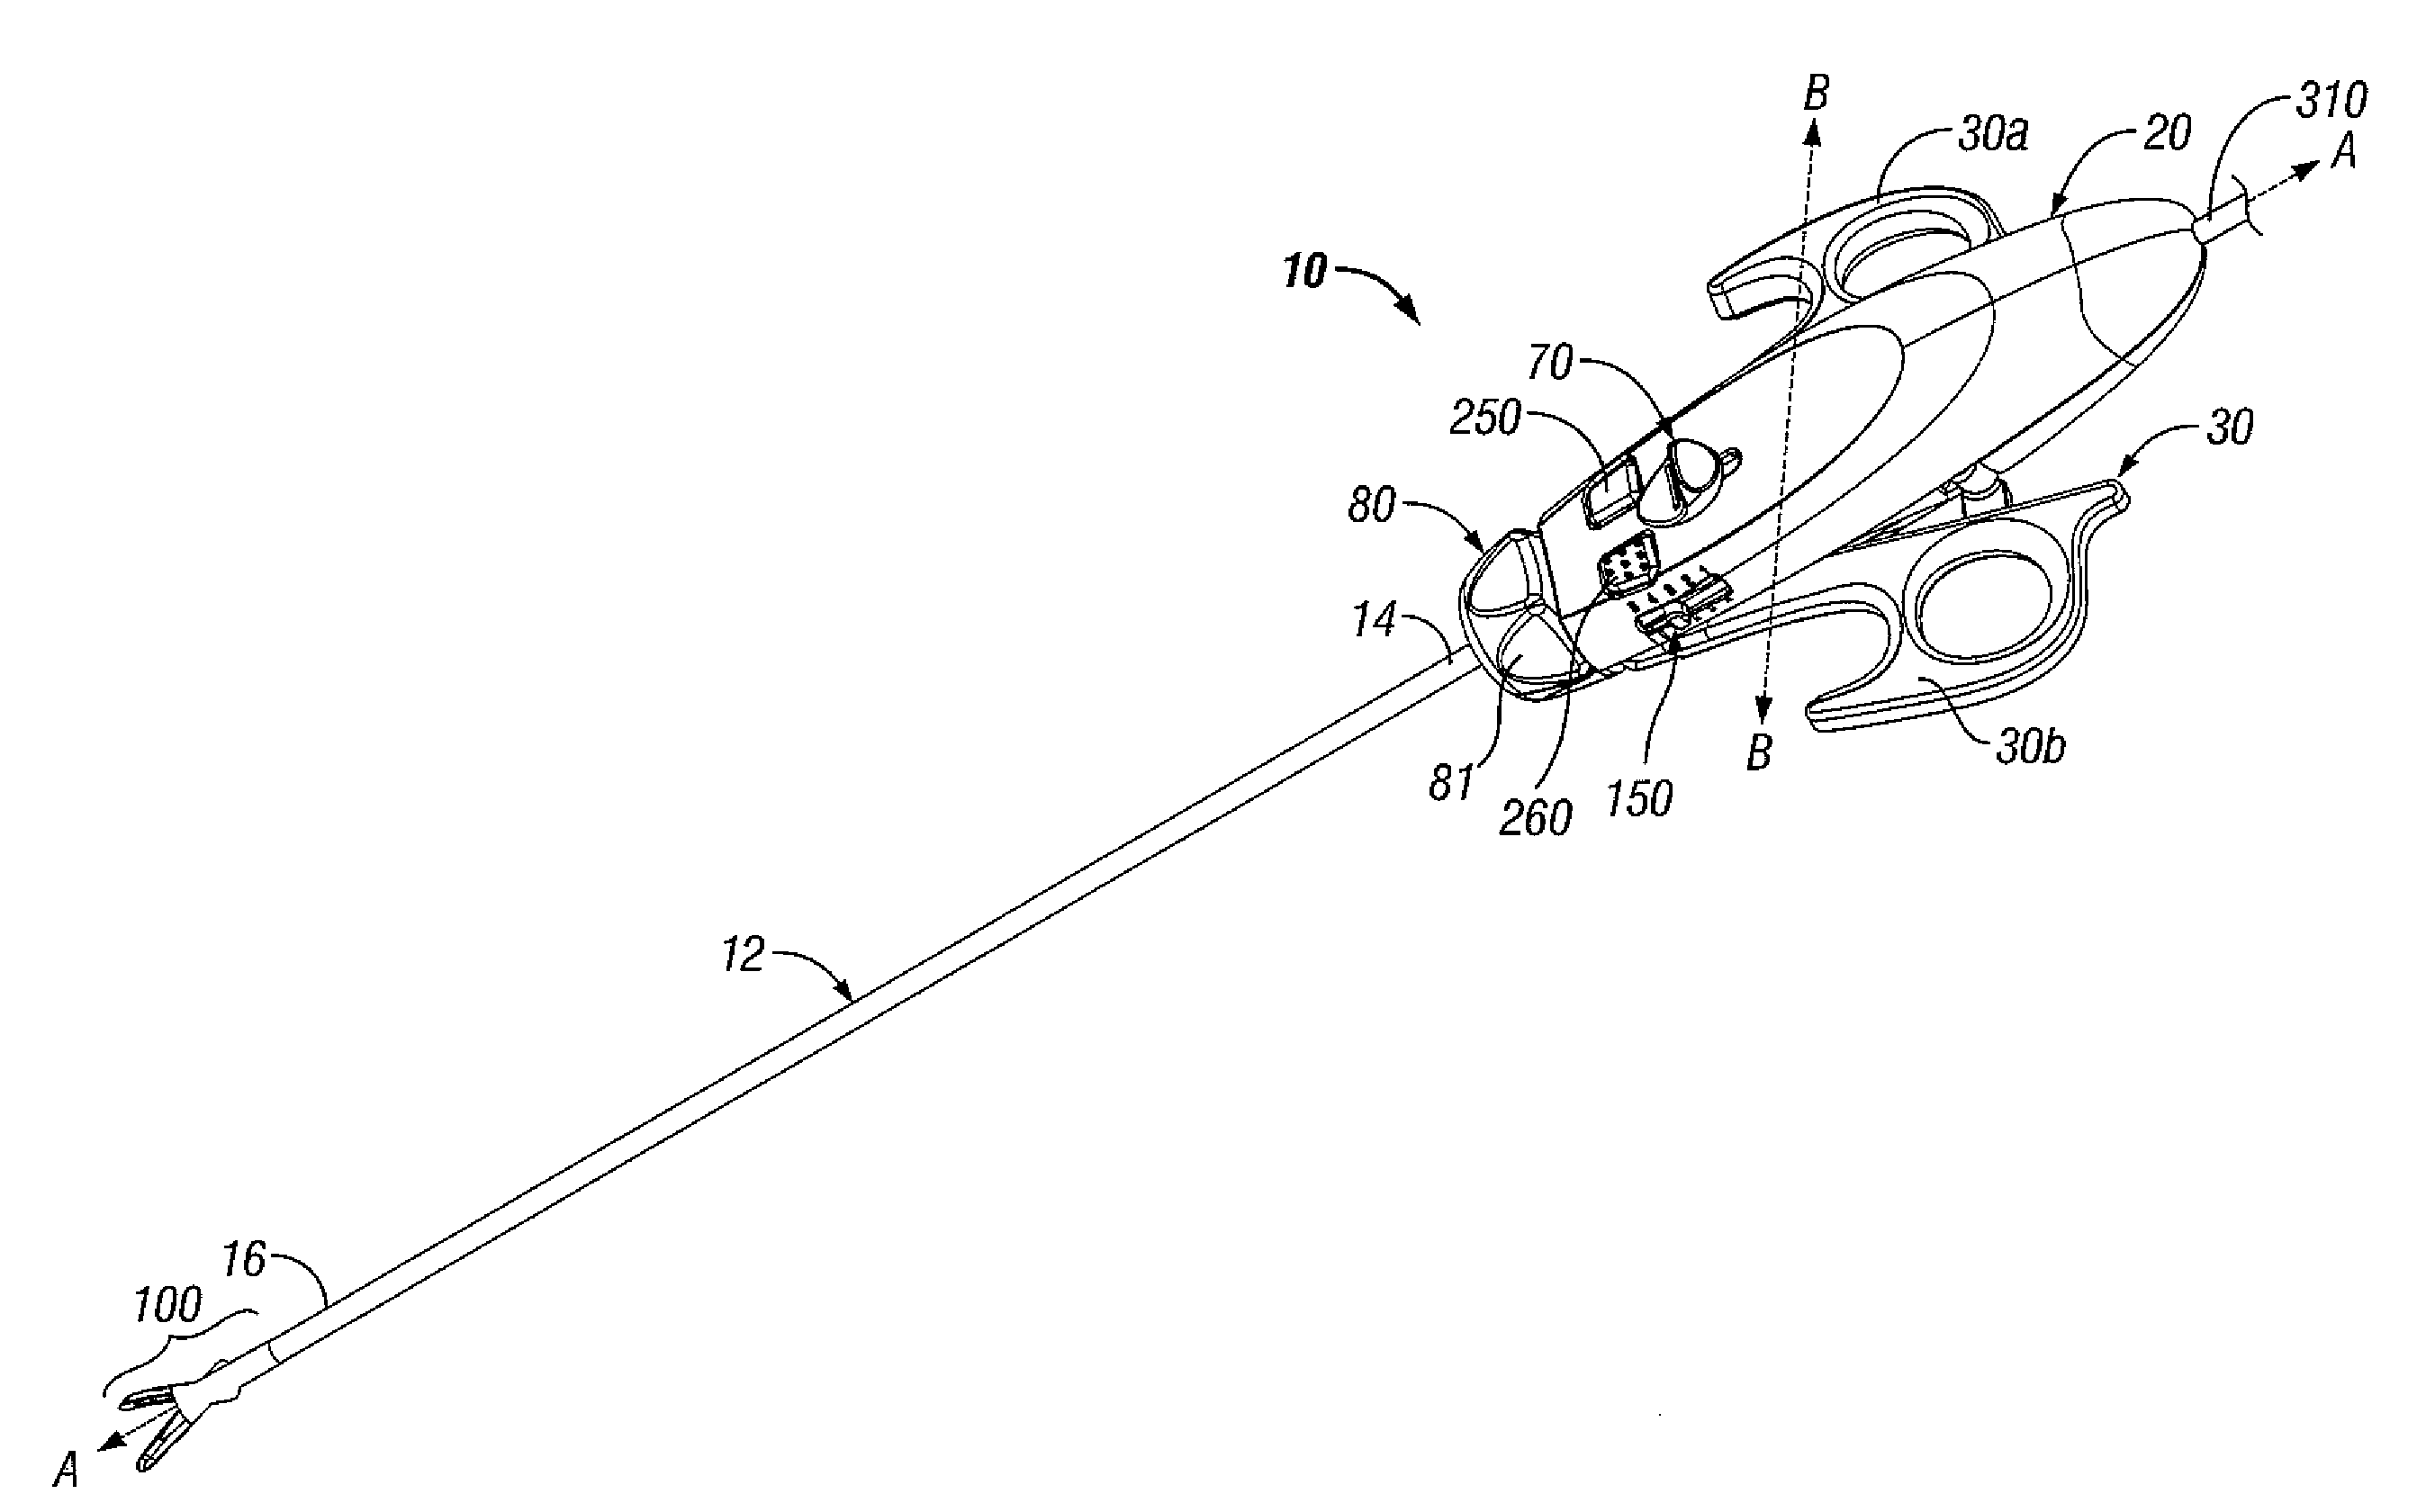 Insulating Boot for Electrosurgical Forceps with Exohinged Structure